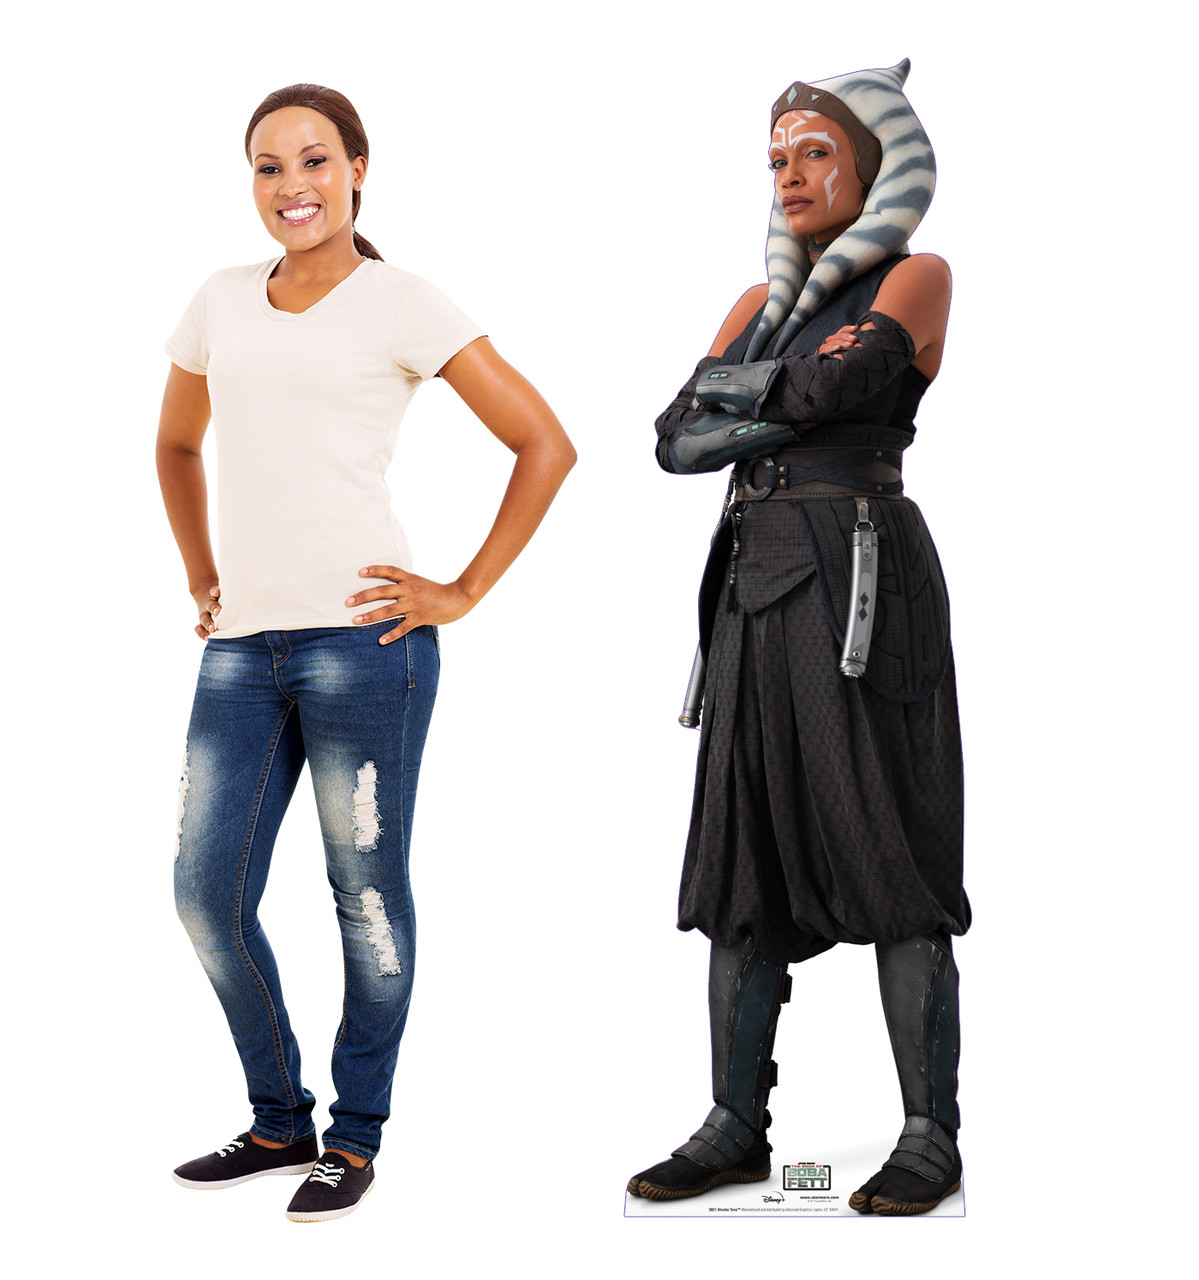 Life-size cardboard standee of Ahsoka TanoTM from Lucas/Disney+ TV series The Book of Boba Fett with model.